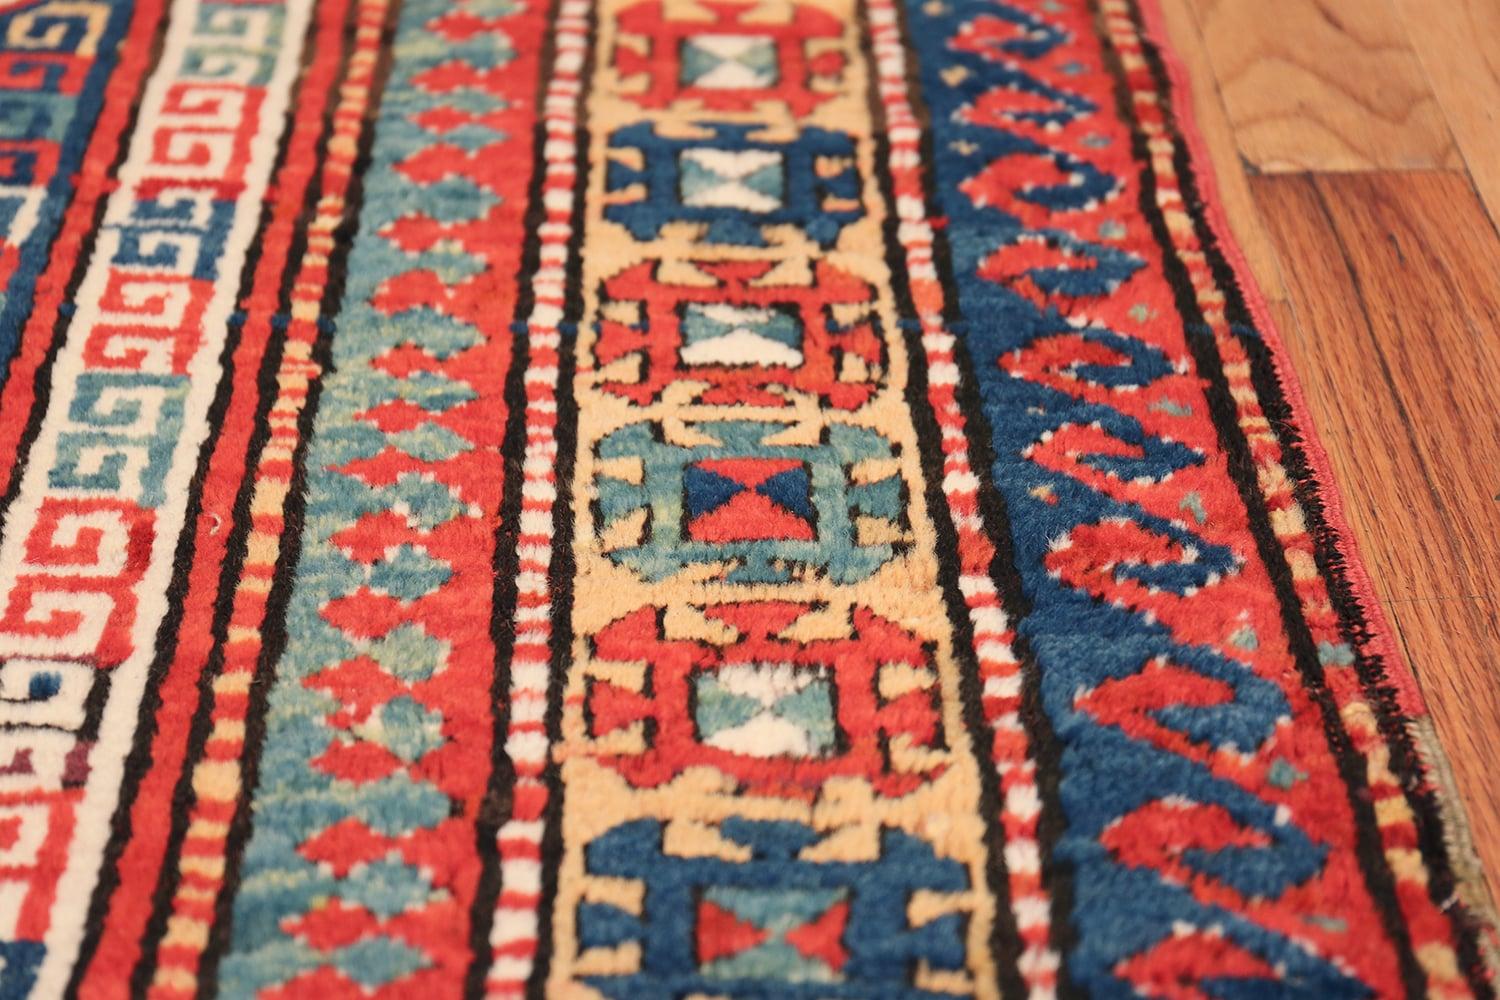 Hand-Knotted Tribal Gallery Size Runner Antique Caucasian Kazak Rug. Size: 5 ft 6 in x 11 ft